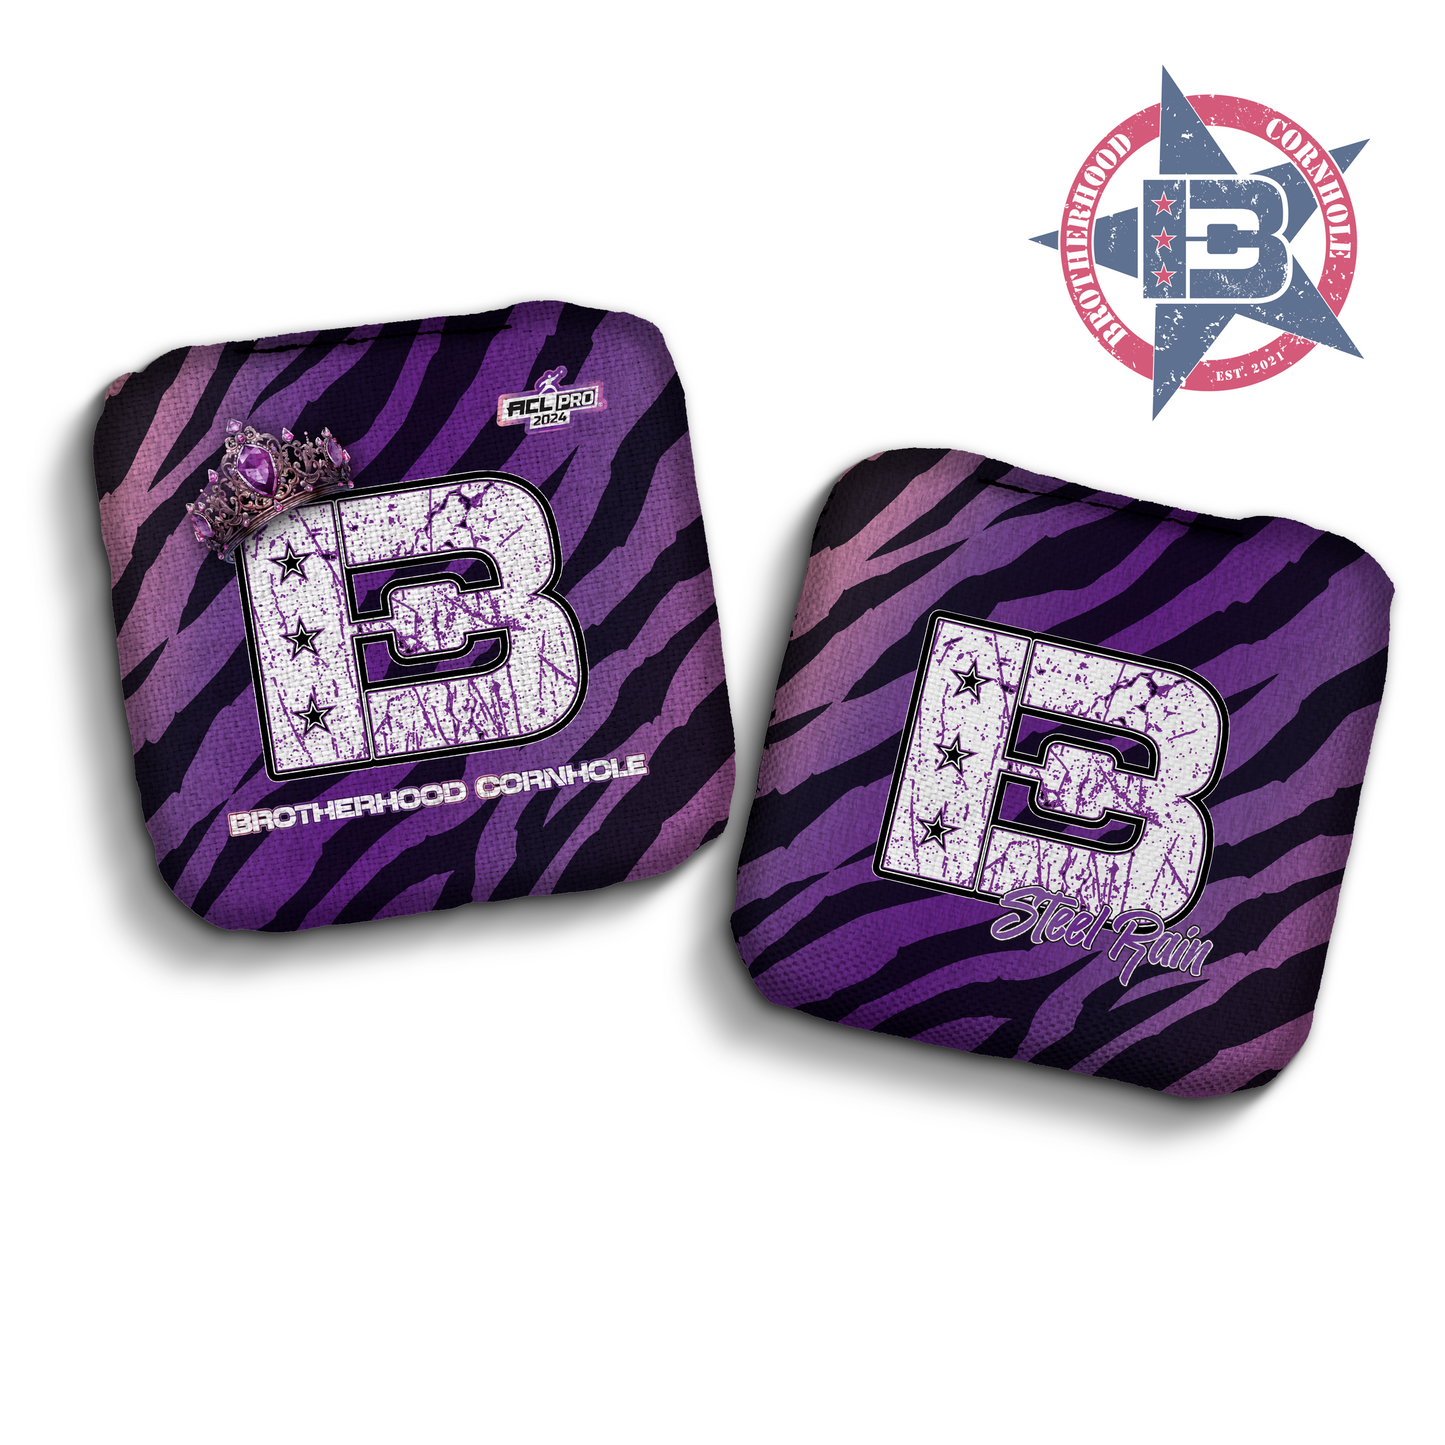 Desirrae McCoy Signature ACL Pro Stamped Cornhole Bags